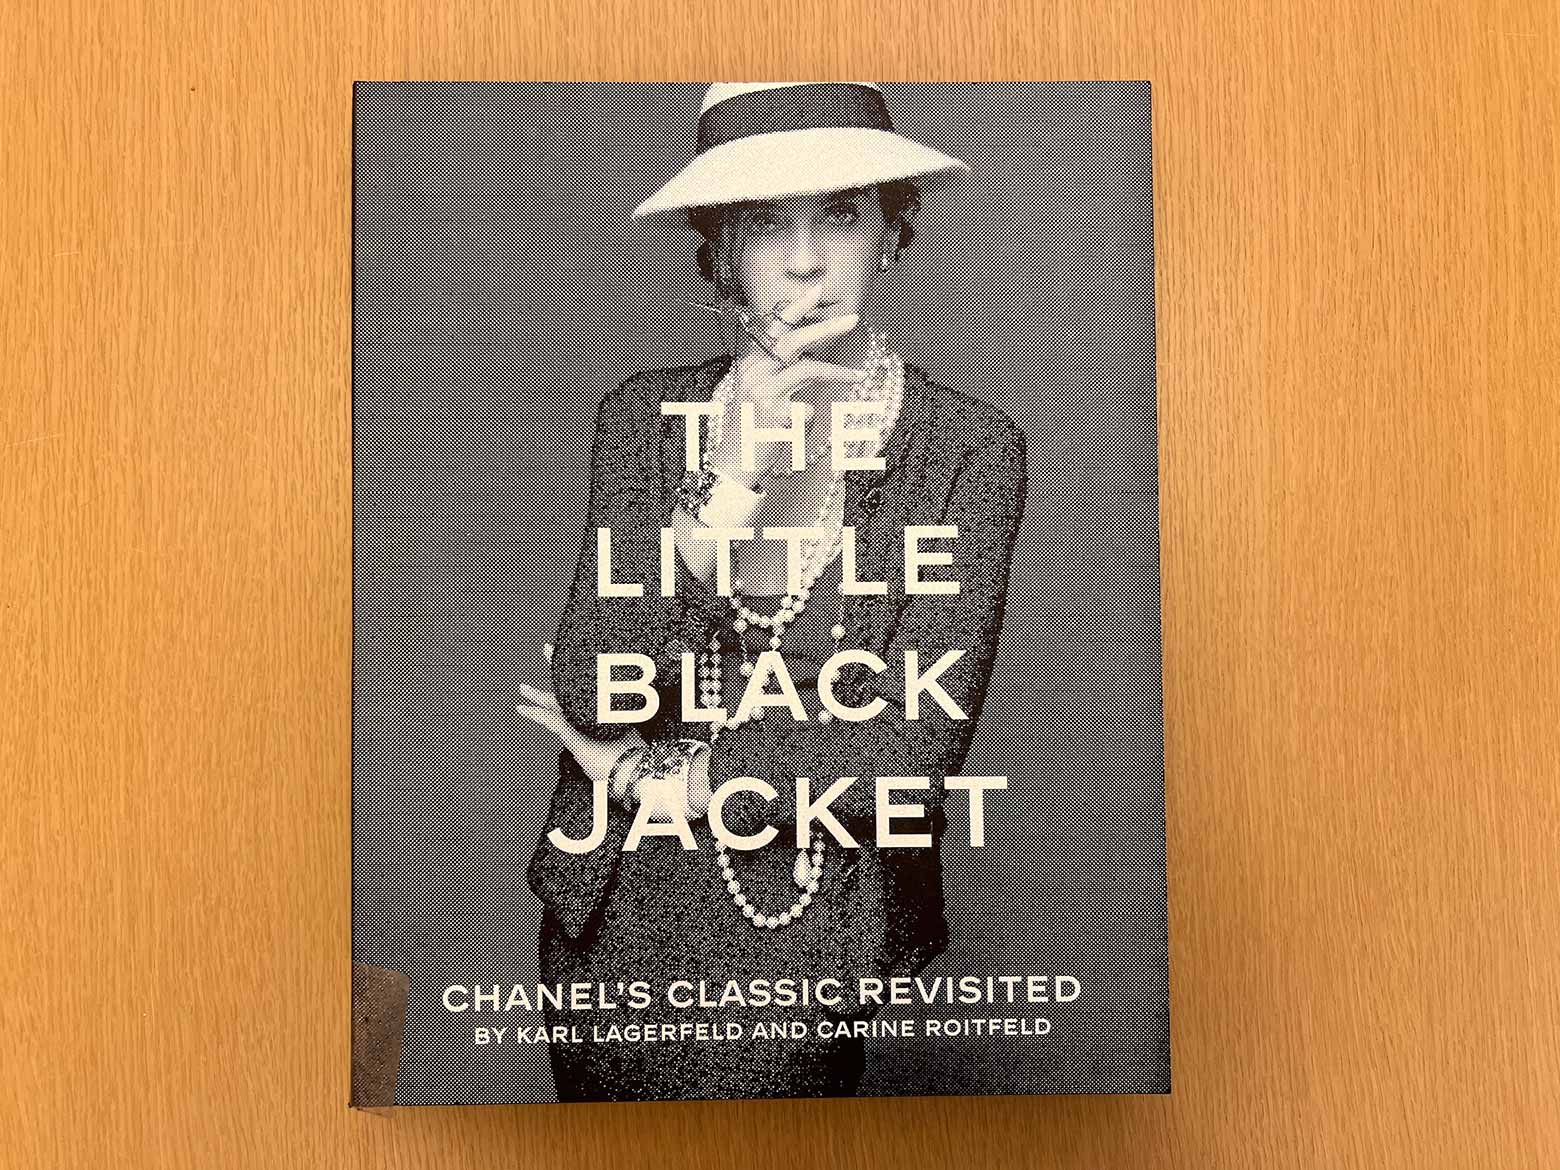 A Library of Design: Chanel and the Little Black Jacket